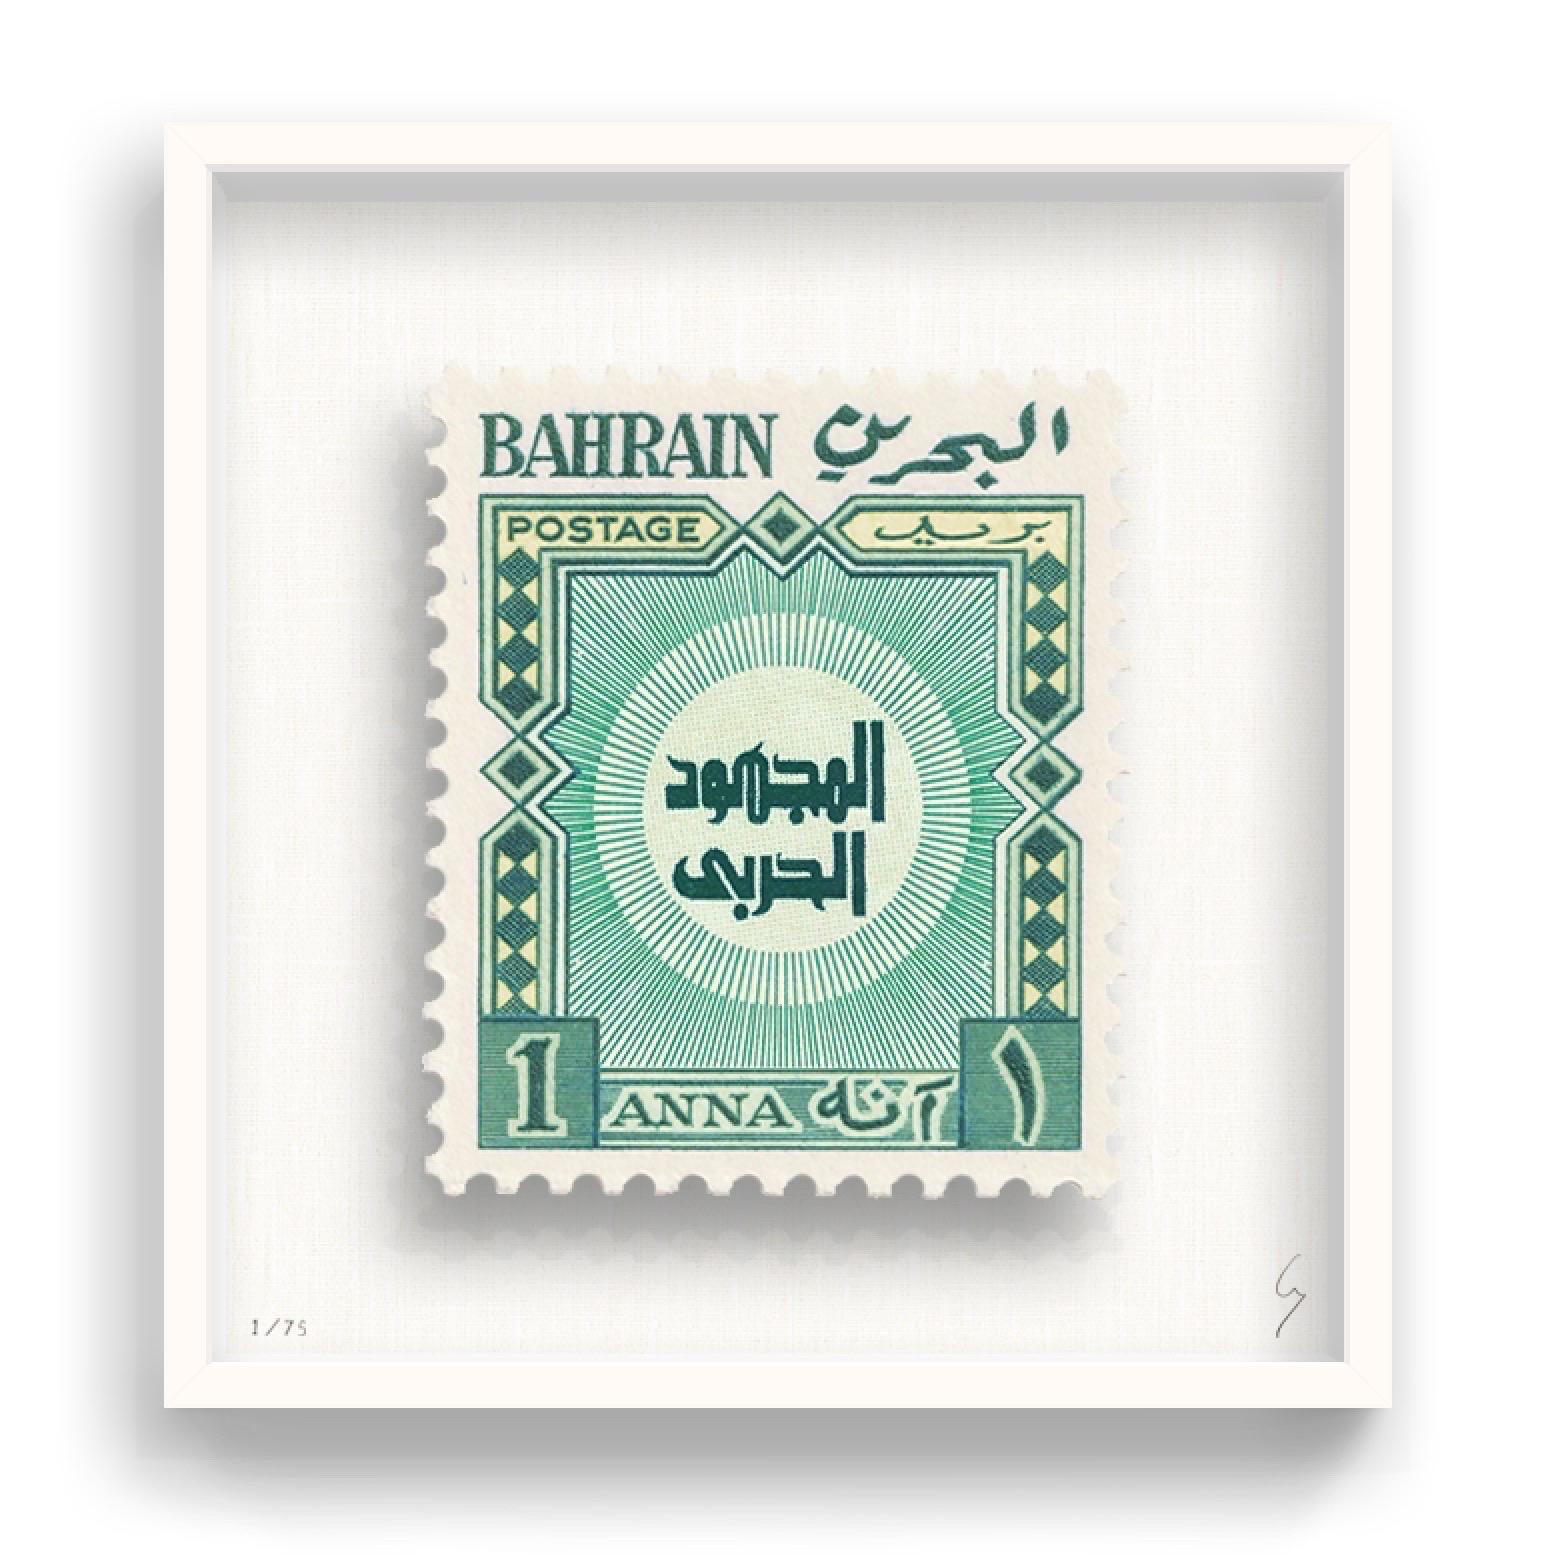 Guy Gee, Bahrain (medium)

Hand-engraved print on 350gsm on G.F Smith card
53 x 56cm (20 4/5 x 22 2/5 in)
Frame included 
Edition of 75 

Each artwork by Guy had been digitally reimagined from an original postage stamp. Cut out and finished by hand,